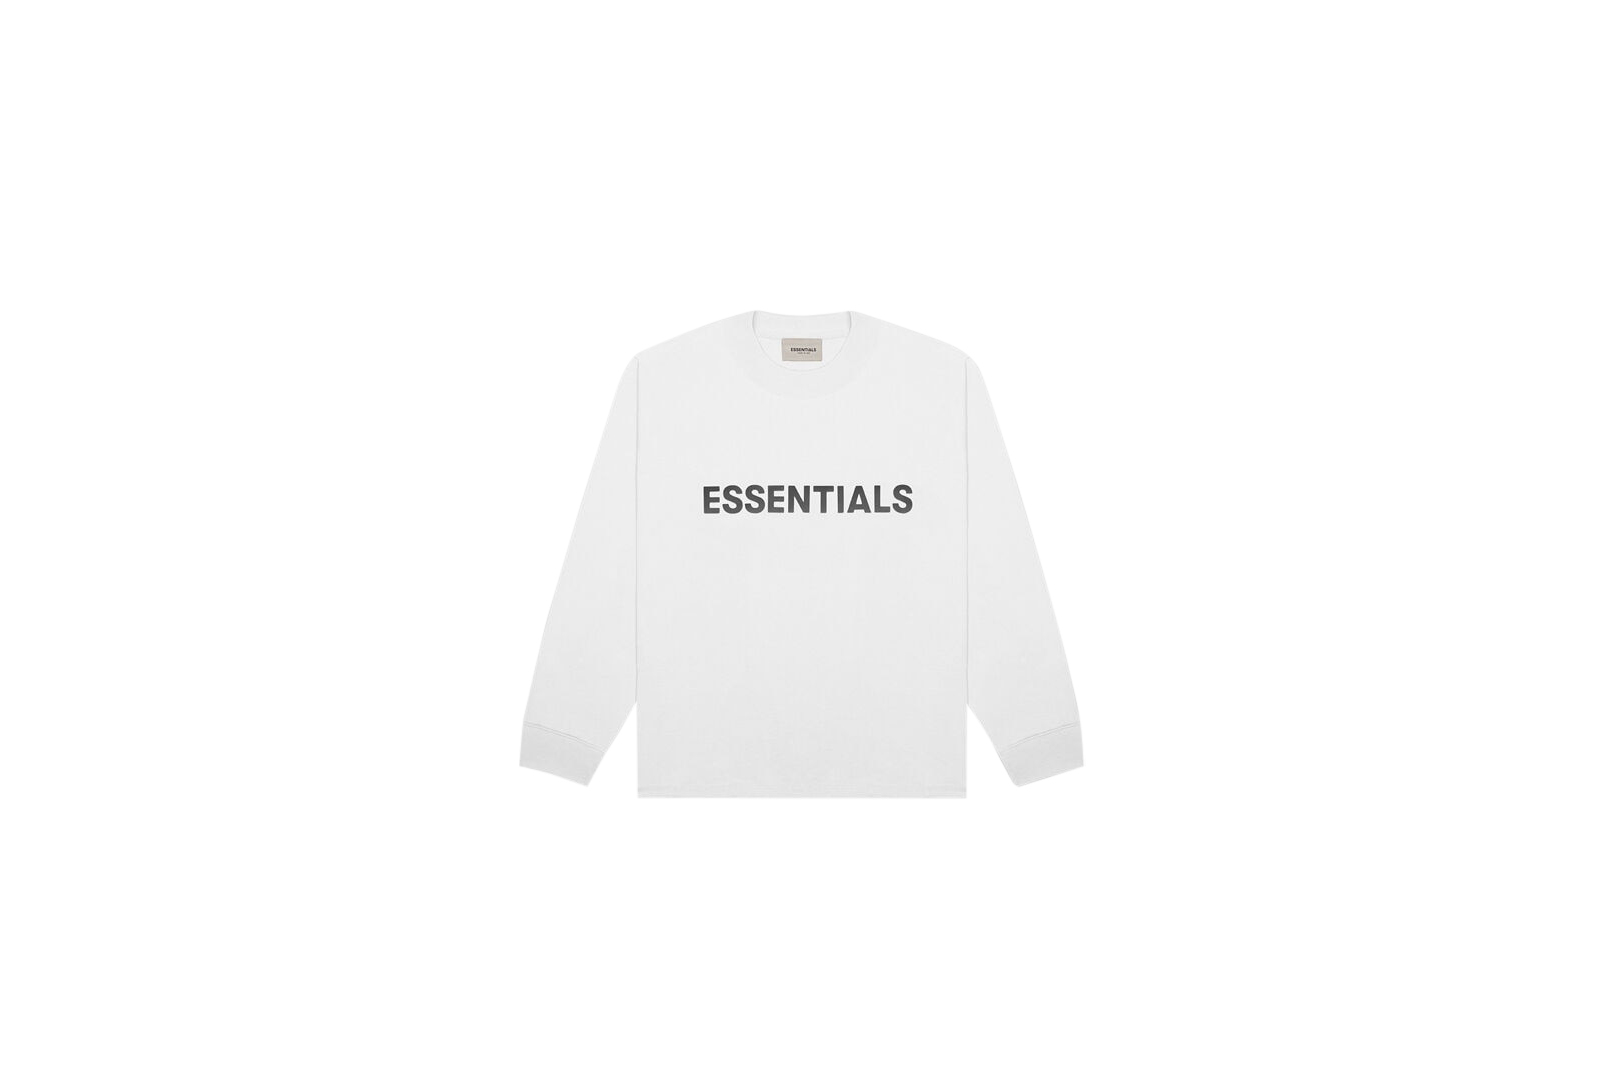 Fear of God ESSENTIALS 3D Silicon Applique Boxy Long Sleeve T 